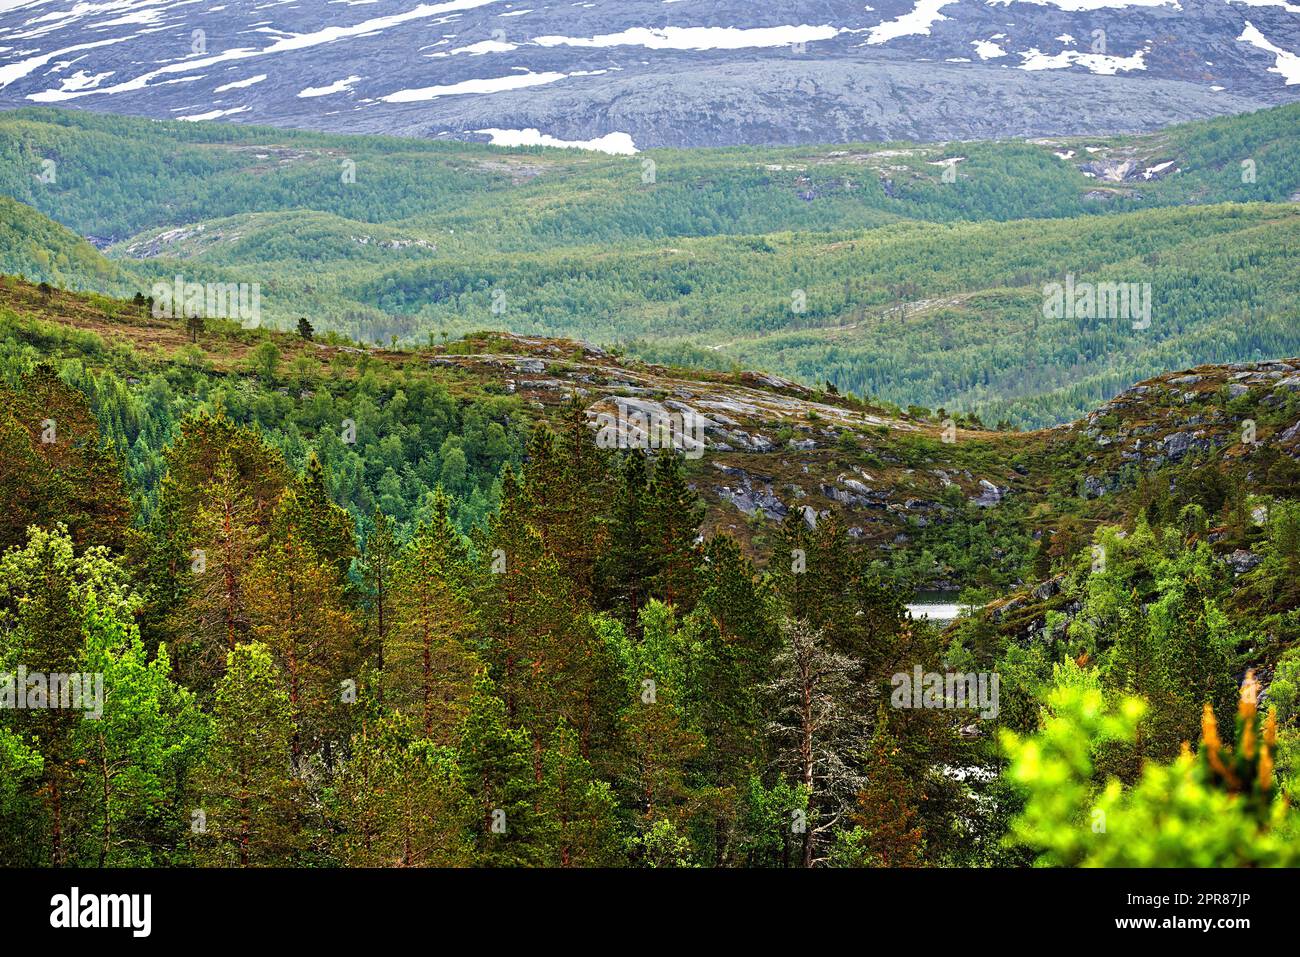 Scenic landscape of Bodo in Nordland with natural surroundings and copy space. Picturesque mountain and lush green hills with blooming trees and plants. Hiking trails in the countryside of Norway Stock Photo